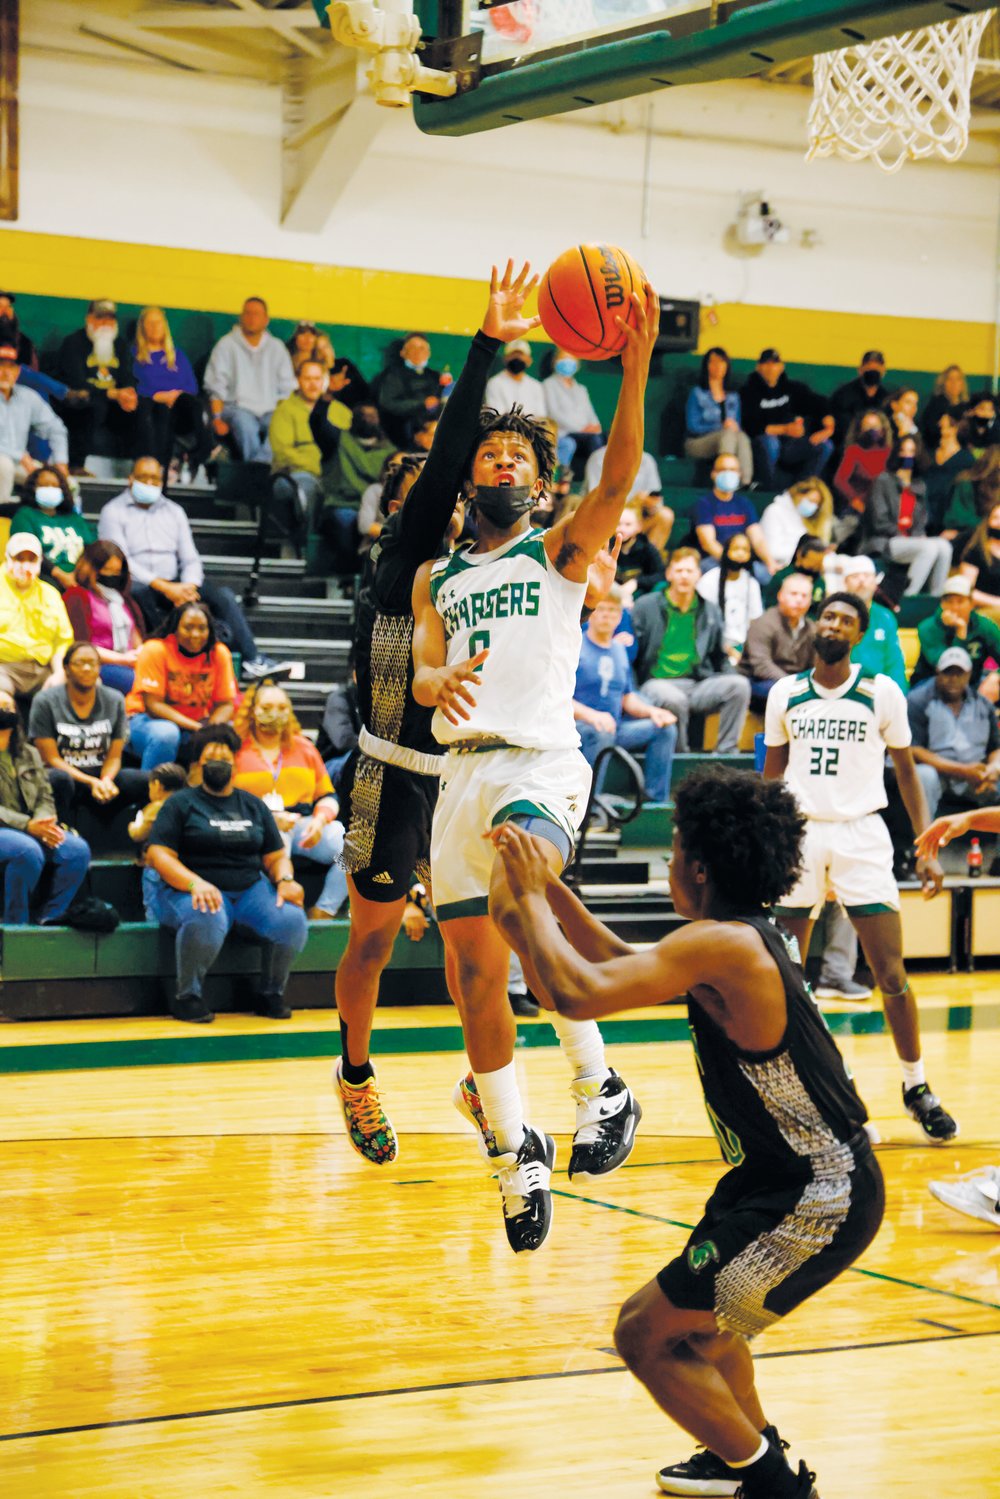 Northwood sophomore Fred Whitaker Jr. (0) avoids a Trojan defender and elevates for a finger roll in the Chargers' 80-40 win over West Brunswick in the 2nd round of the NCHSAA 3A playoffs last Thursday. Whitaker was one of four Chargers in double-figures, scoring 15 points.